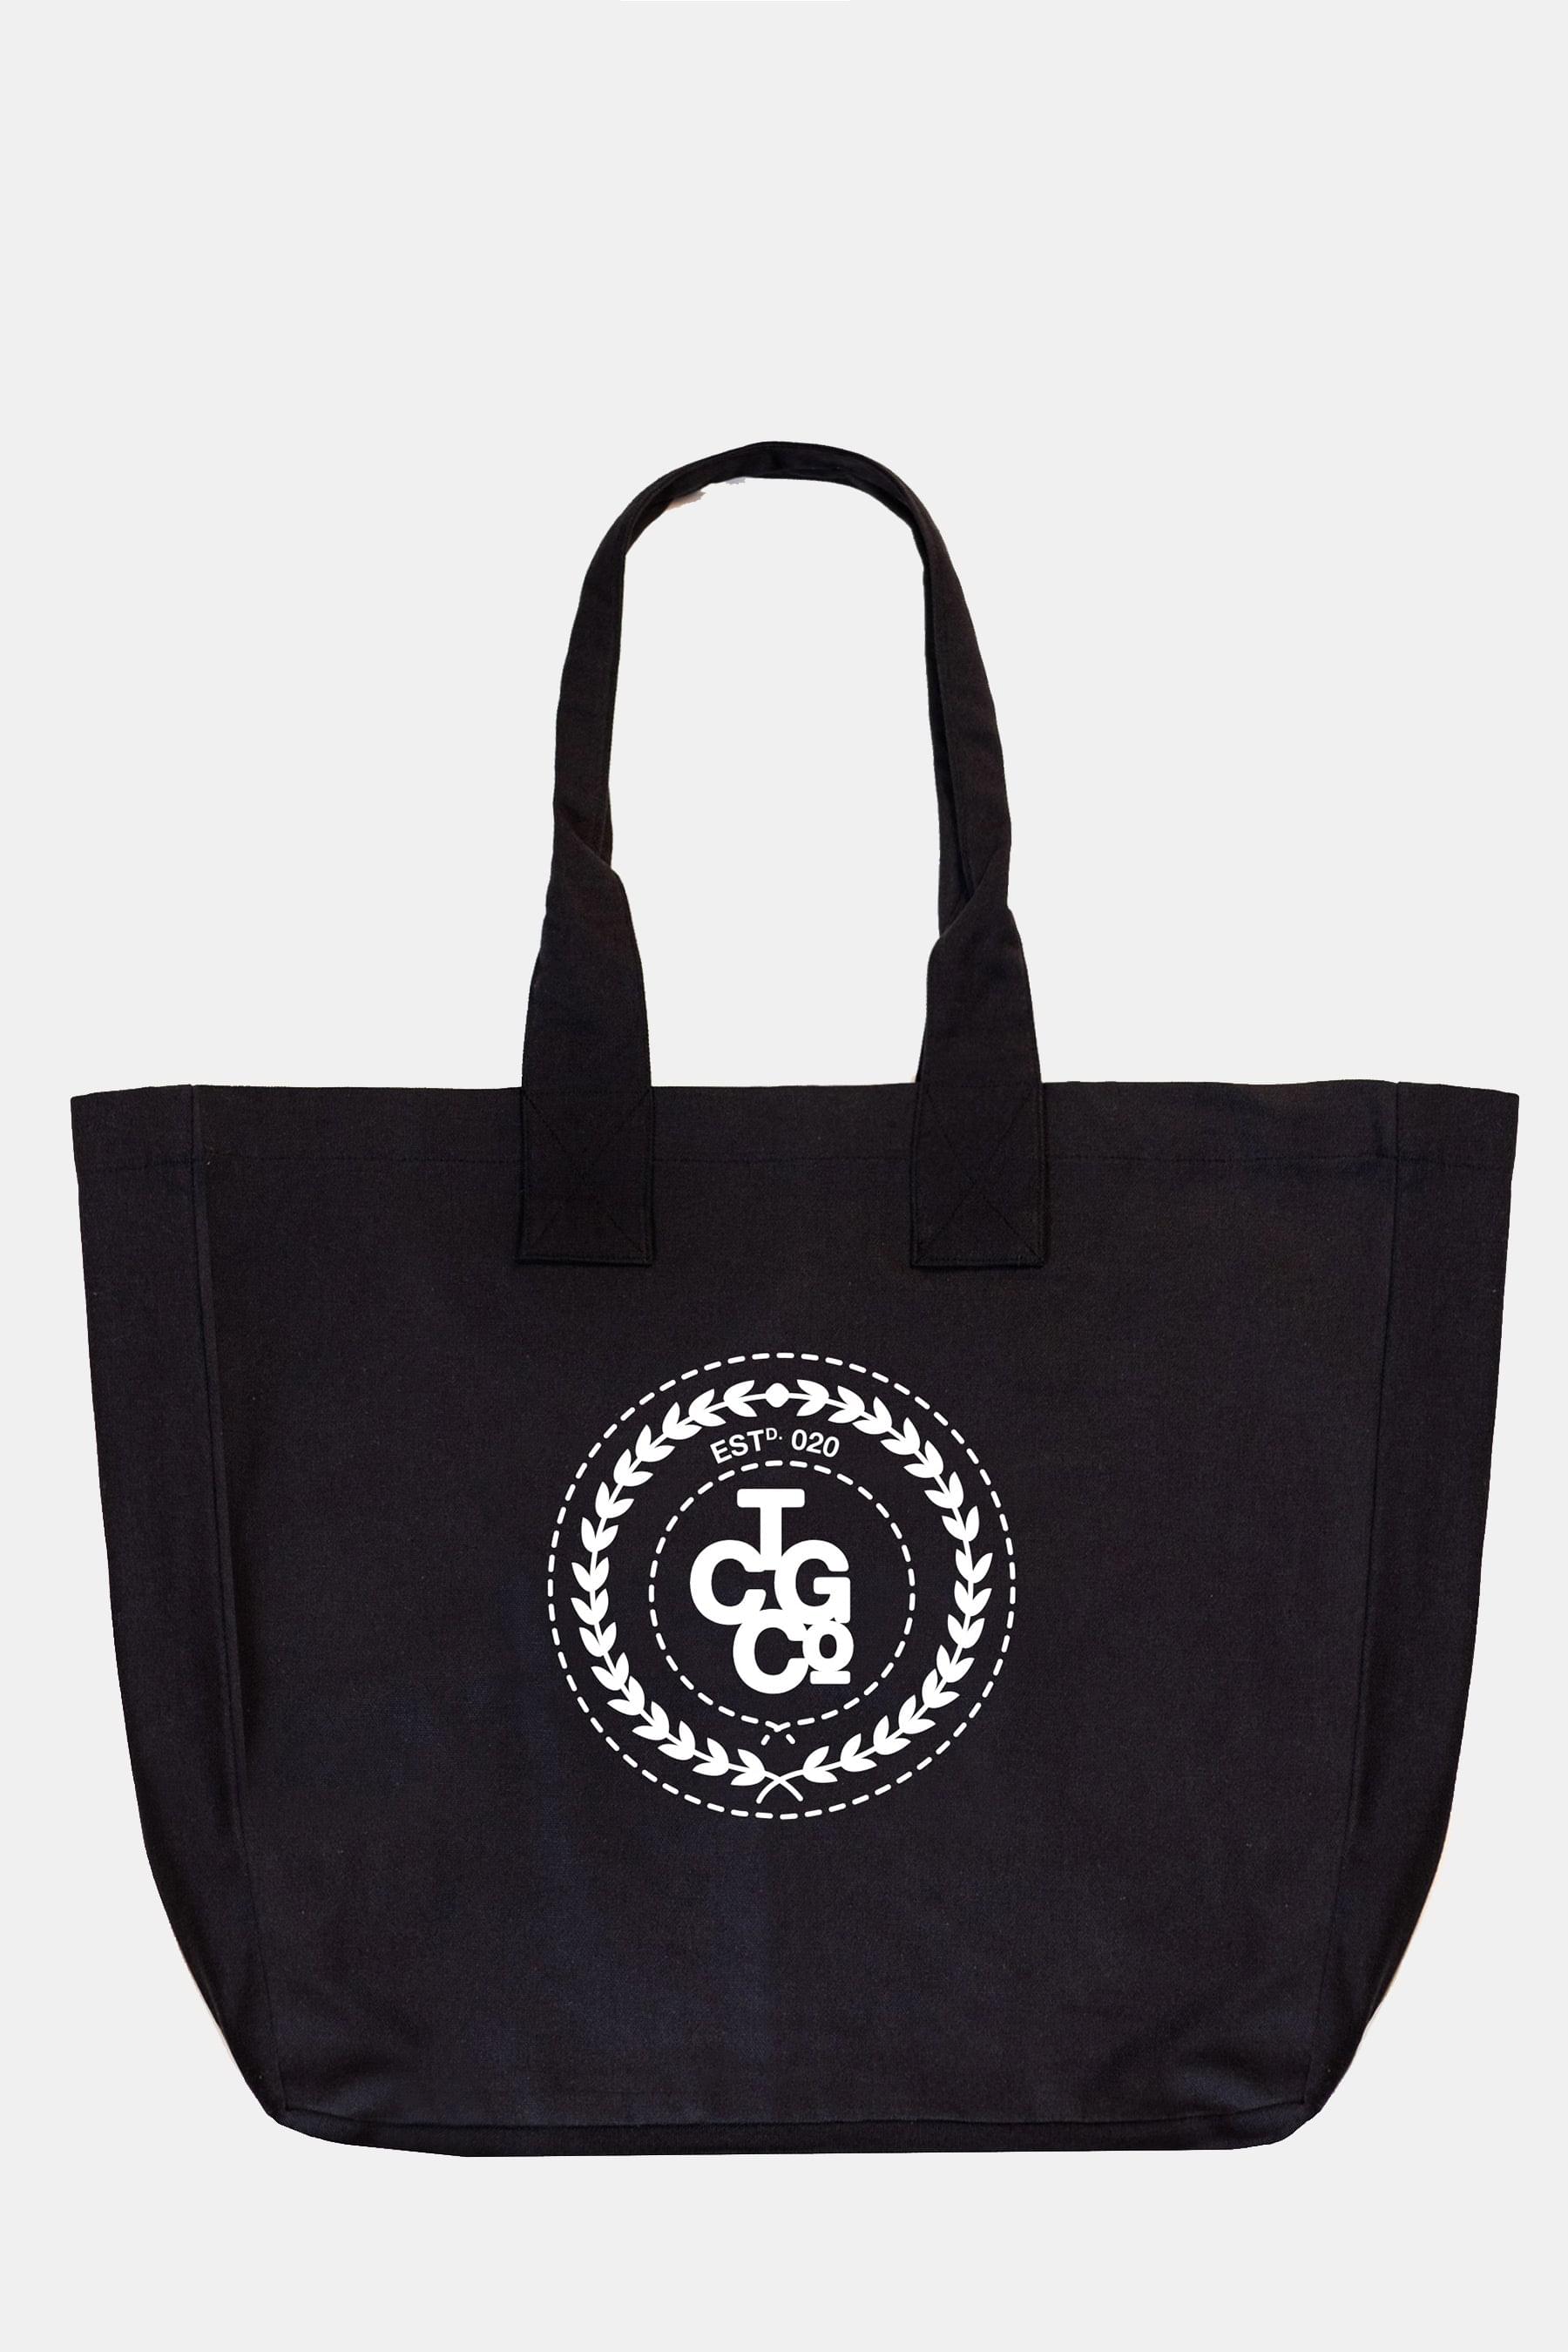 Charcoal 100% Recycled Cotton Market Tote - ESTd Logo